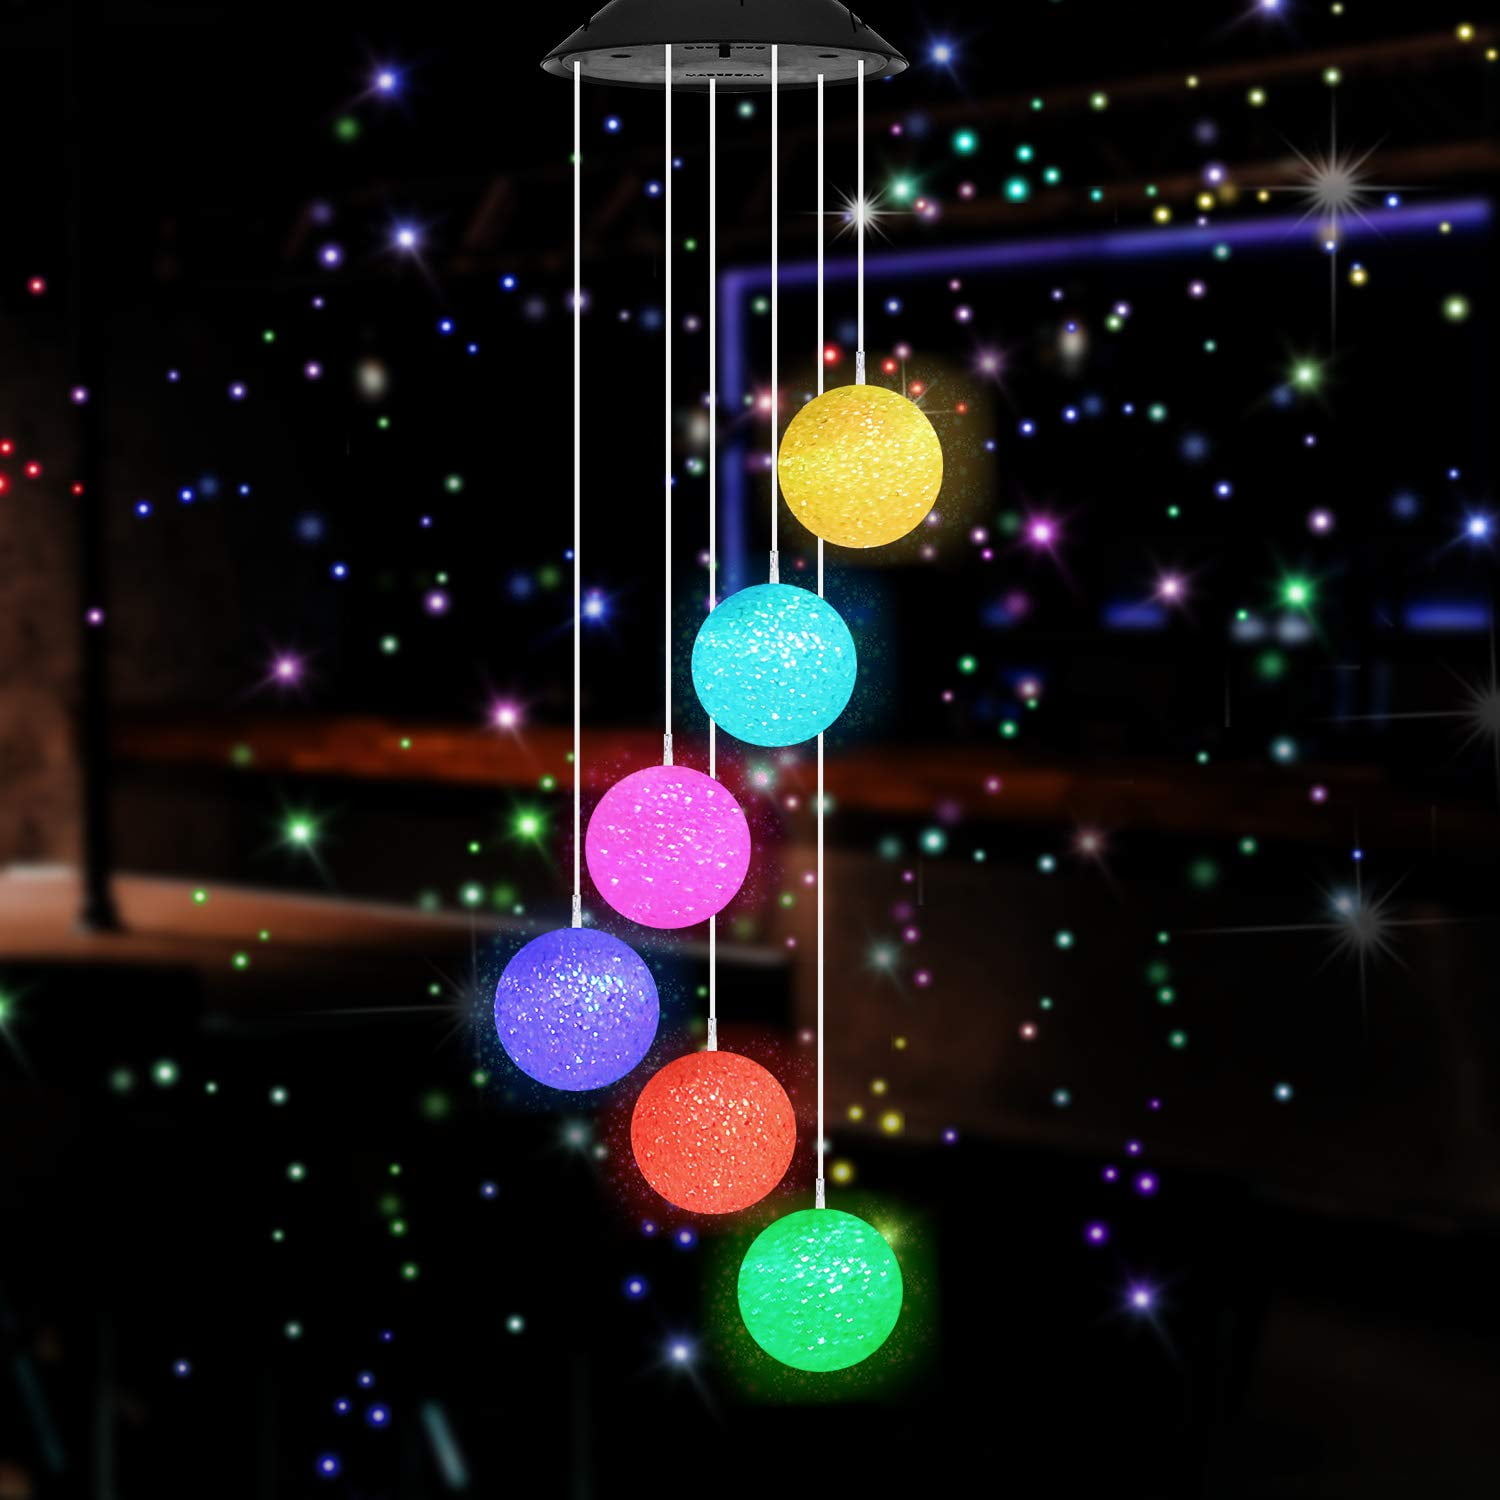 Details about   Solar Power Light LED Wind Chime Color Changing Lamp Yard Garden Decor Ball Bird 